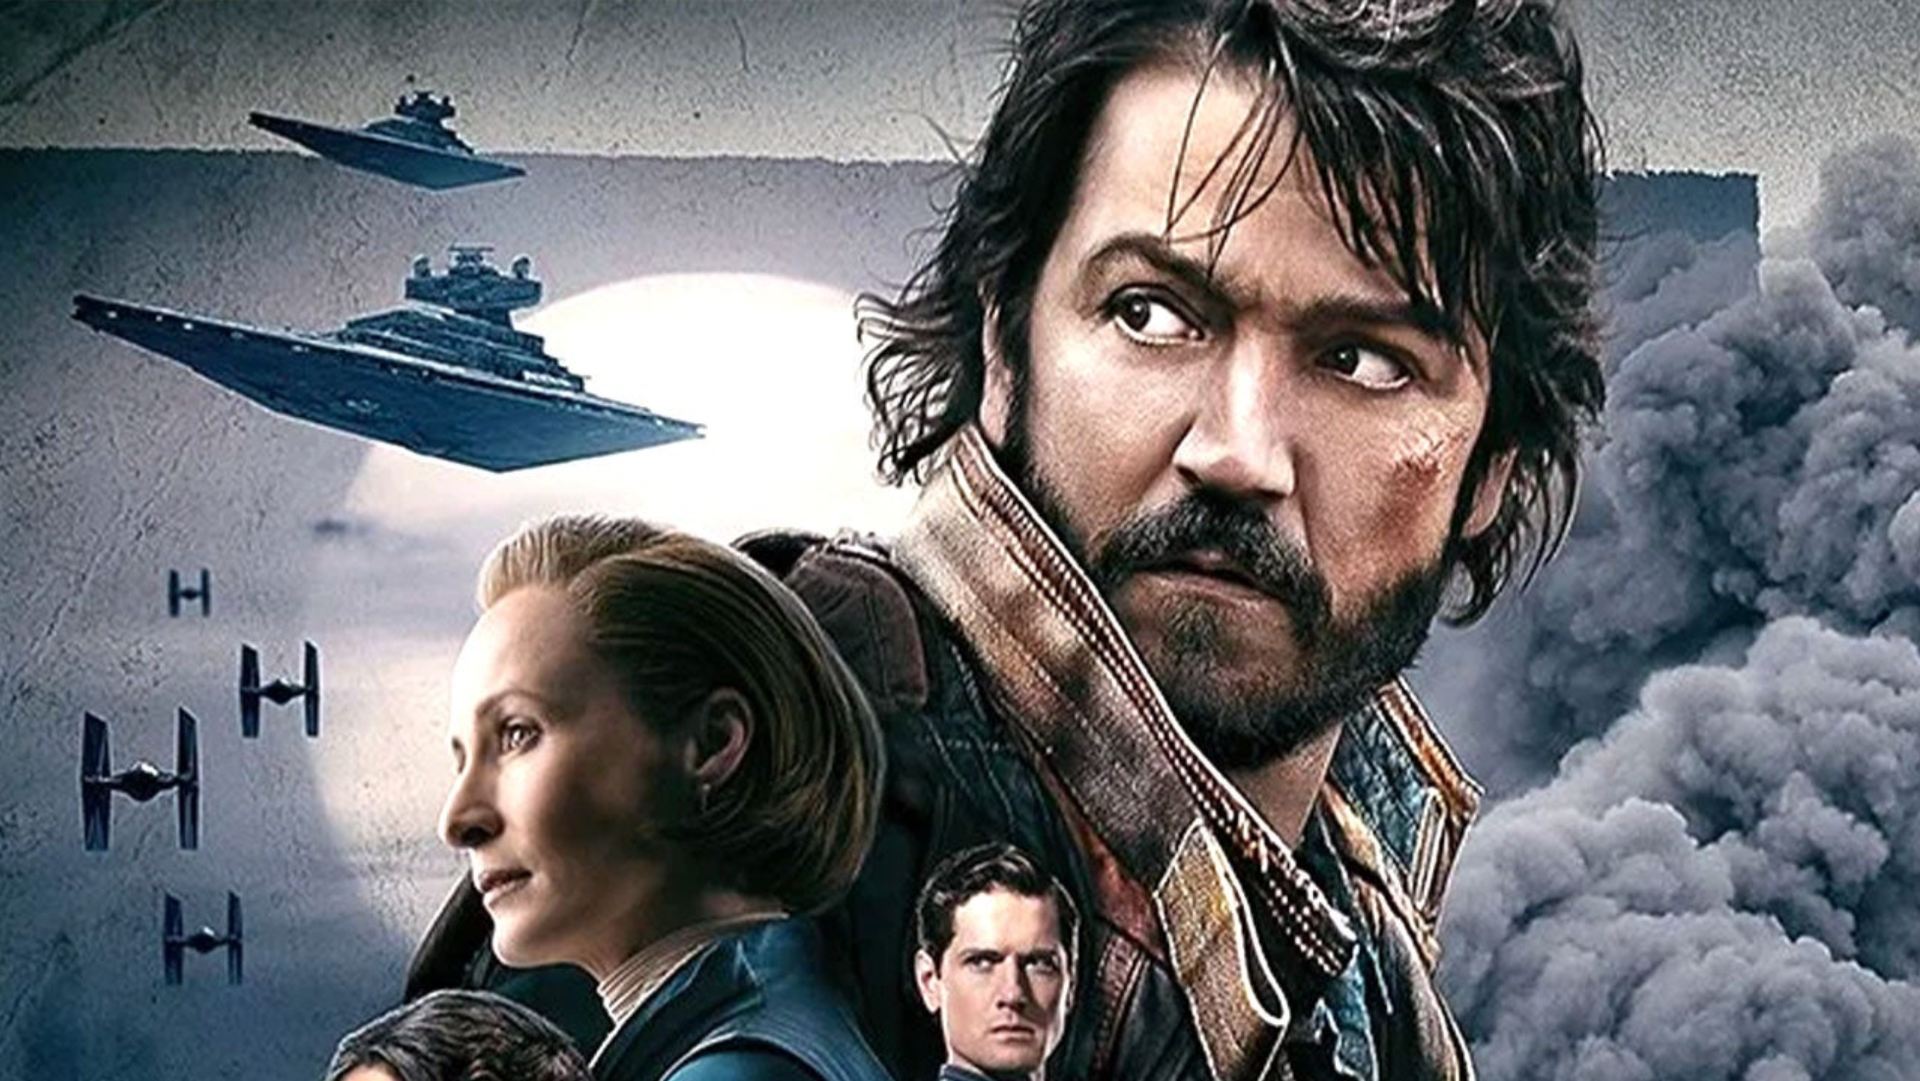 Andor' Trailer: 'Star Wars' Expands the 'Rogue One' Story